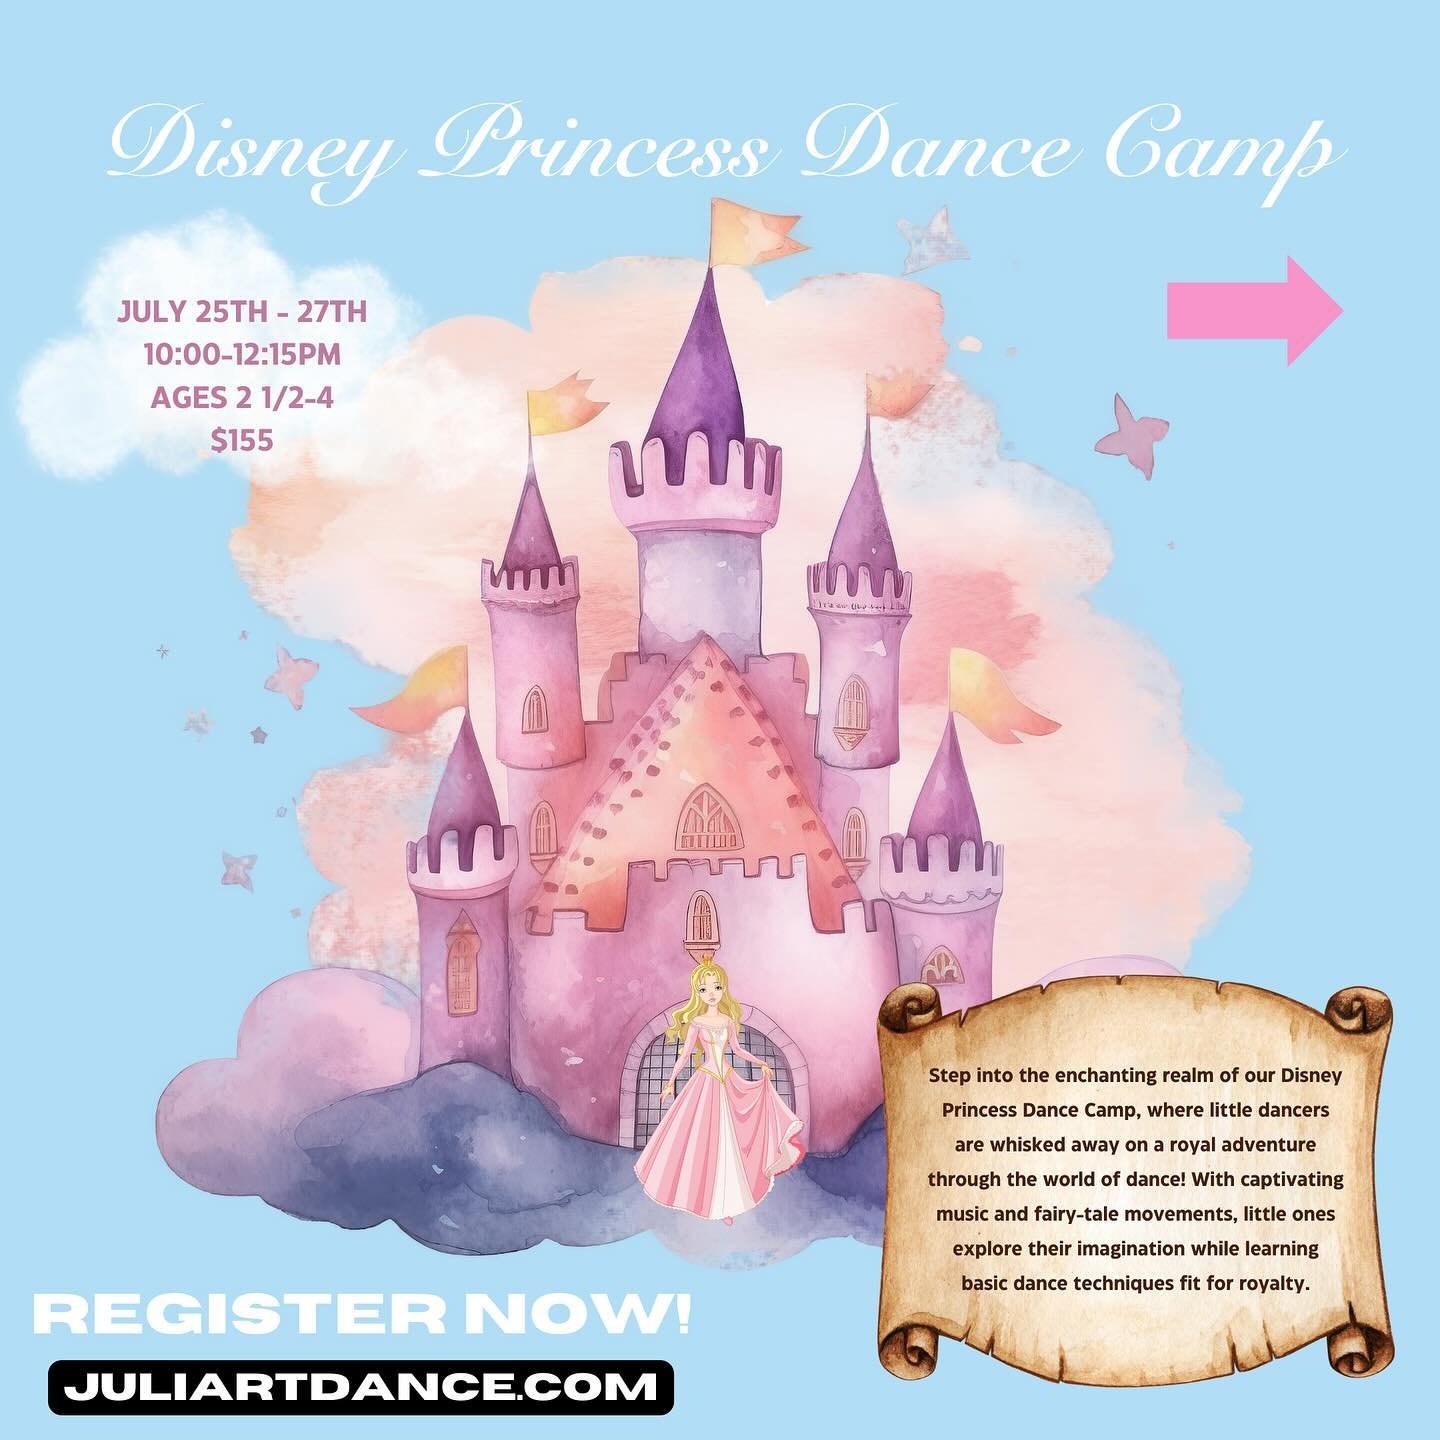 If your little one is looking for a magical princess dance camp, we&rsquo;ve got you covered! 👑✨💗

This Disney Princess Dance Camp is extra special because of some exciting surprises from special visitors! 👀

There&rsquo;s still time to register! 